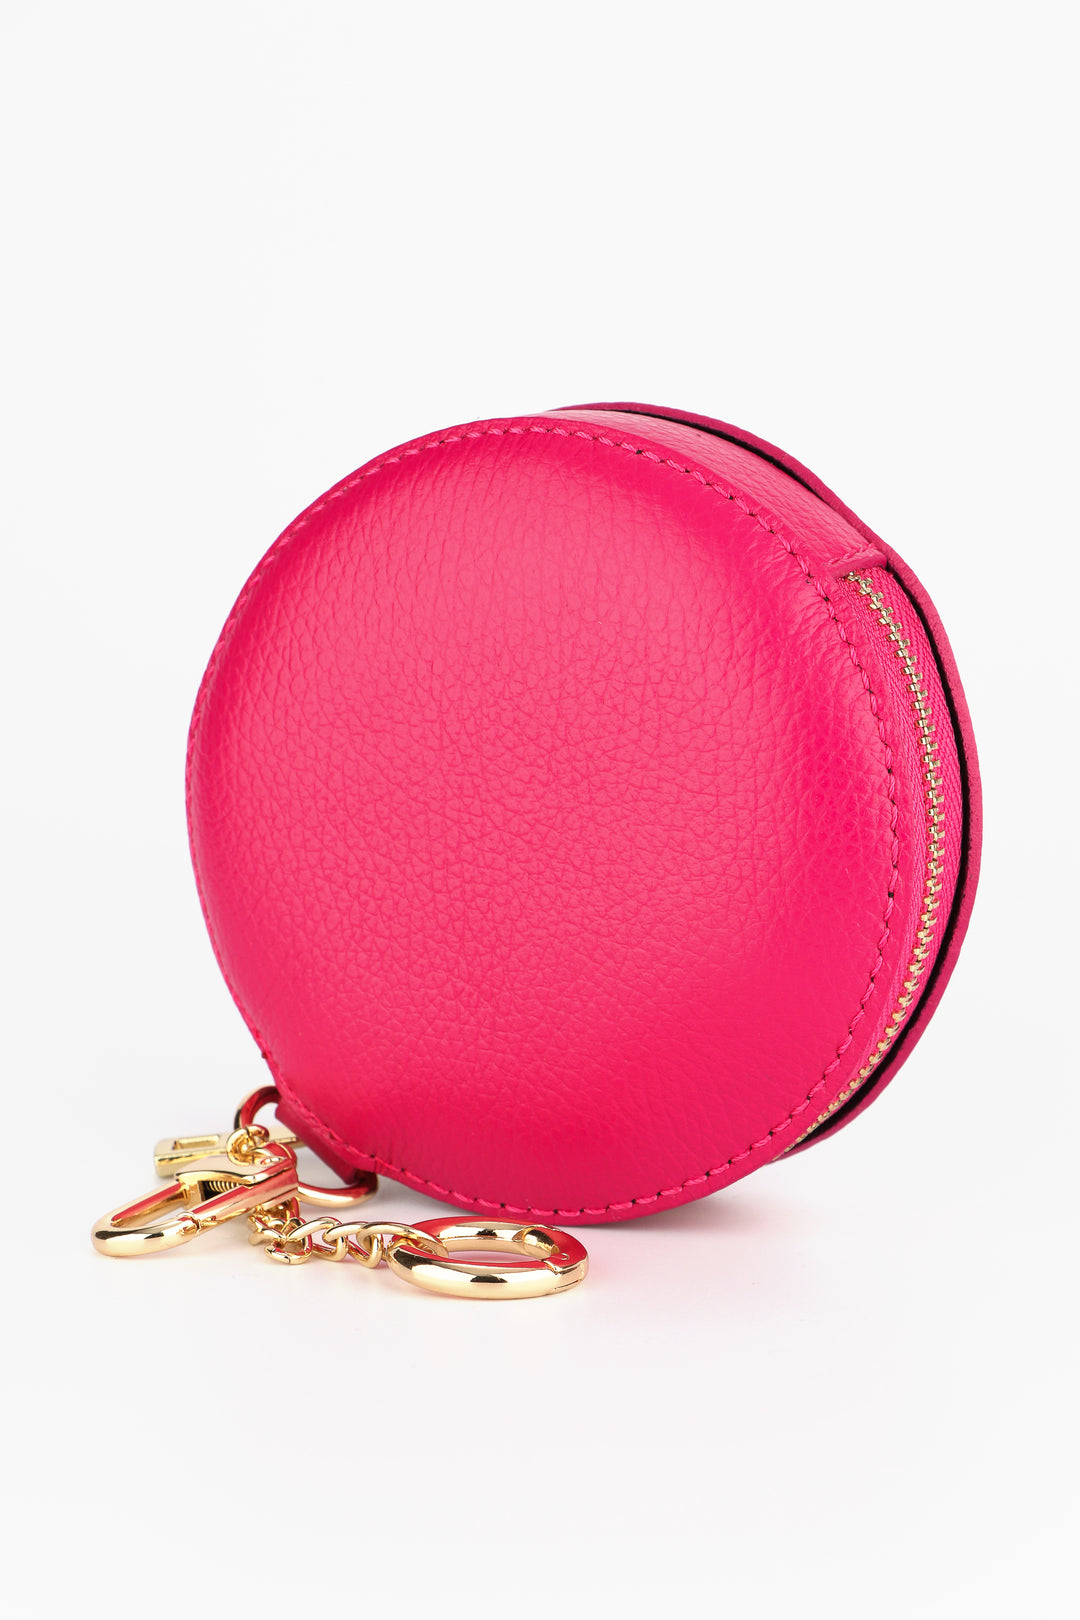 raspberry pink round leather coin purse with a zip closure. the coin purse has two attachment keyrings in gold